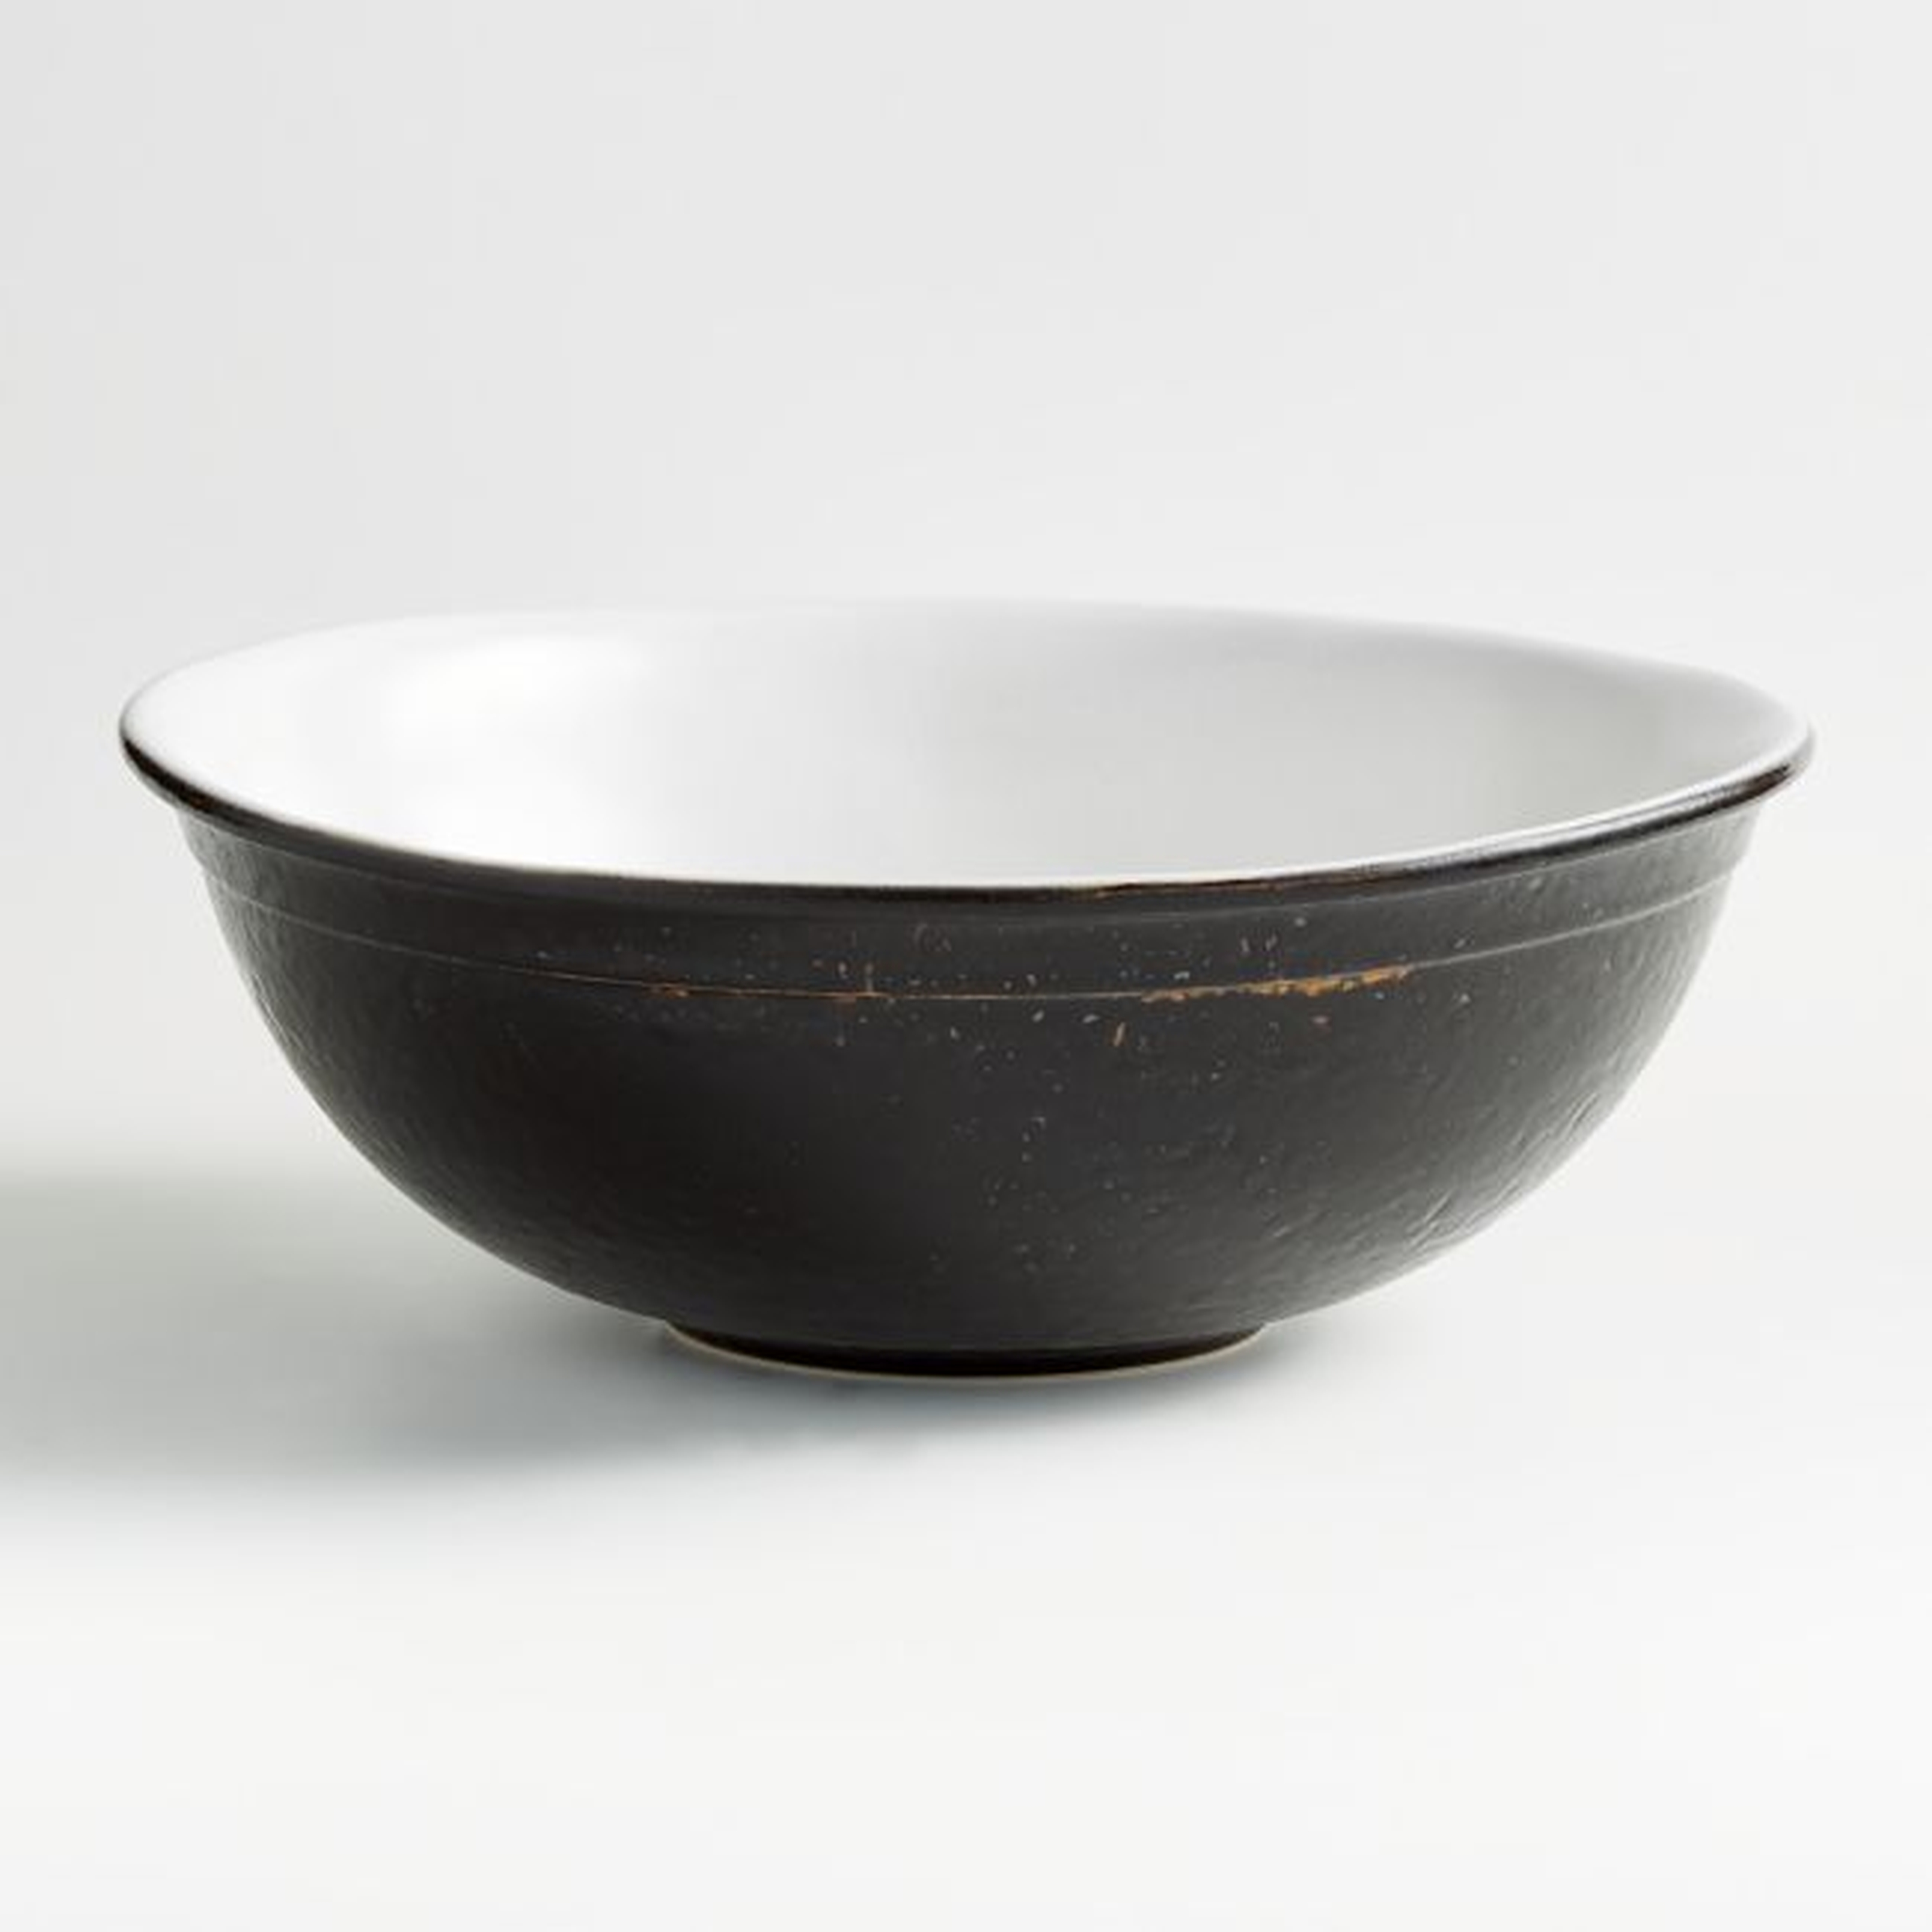 Range Large Serving Bowl by Leanne Ford - Crate and Barrel